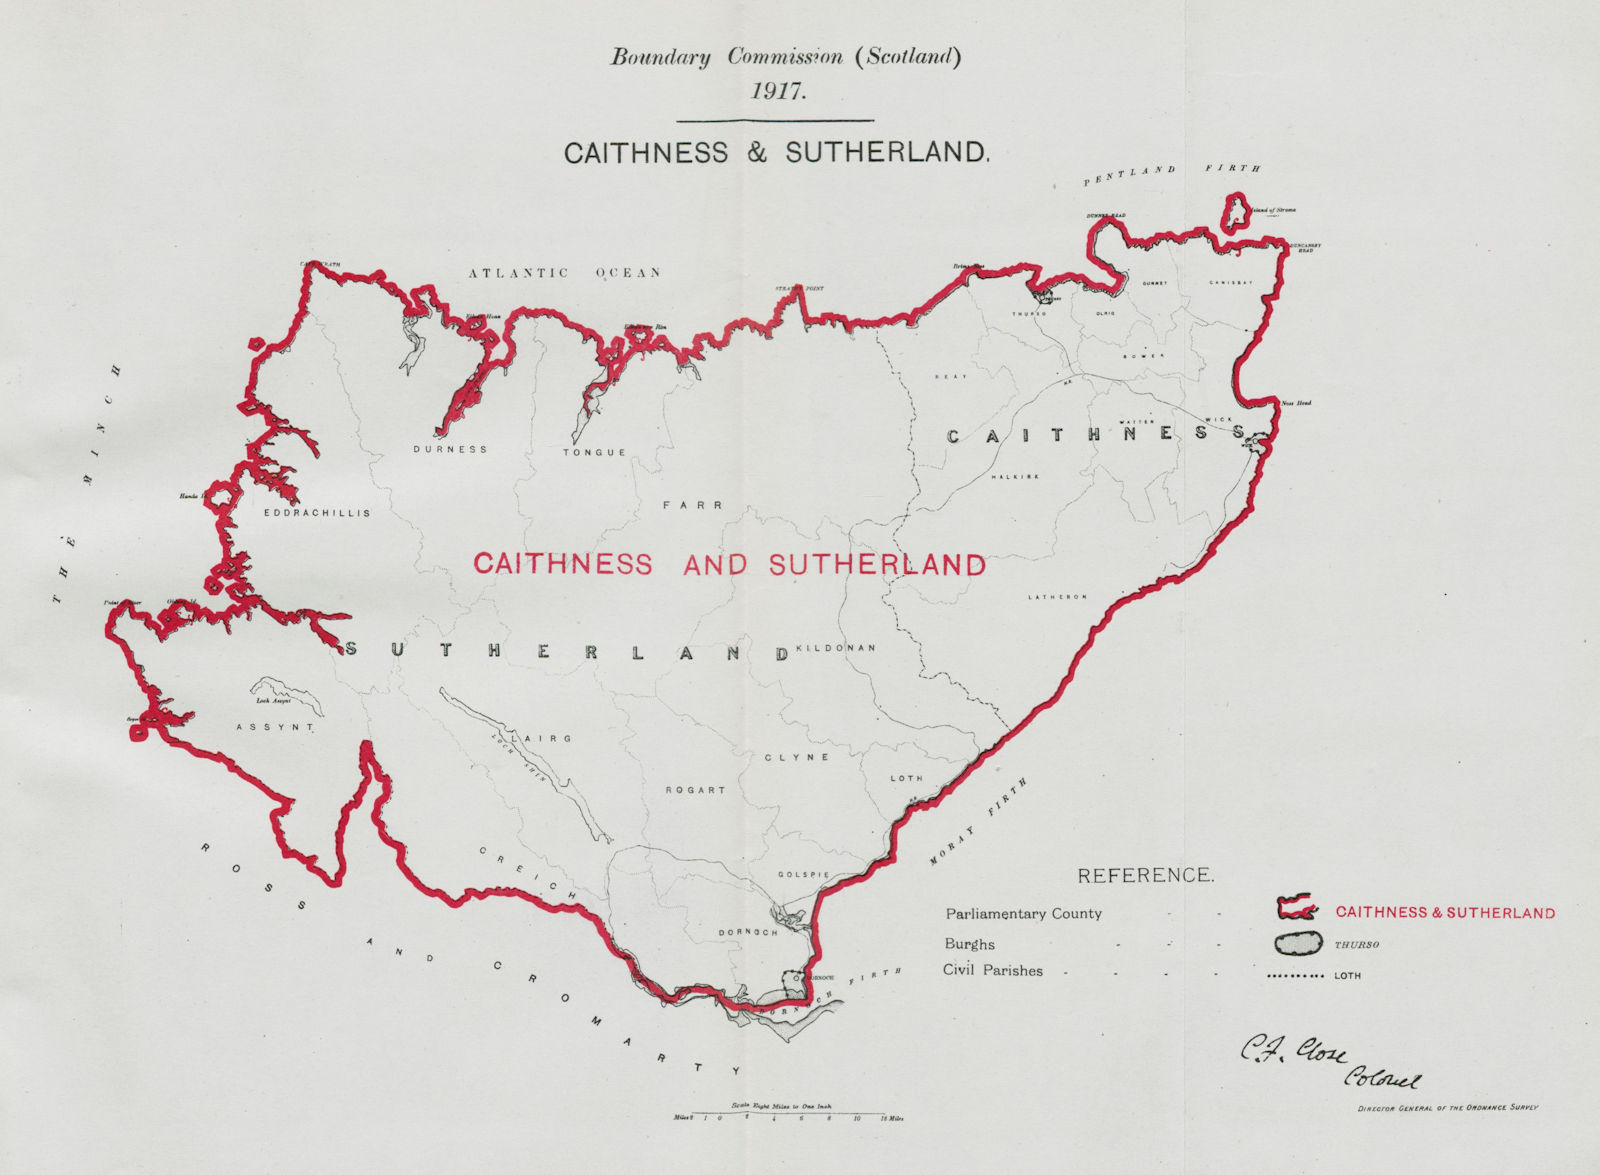 Caithness & Sutherland Parliamentary County. BOUNDARY COMMISSION 1917 old map